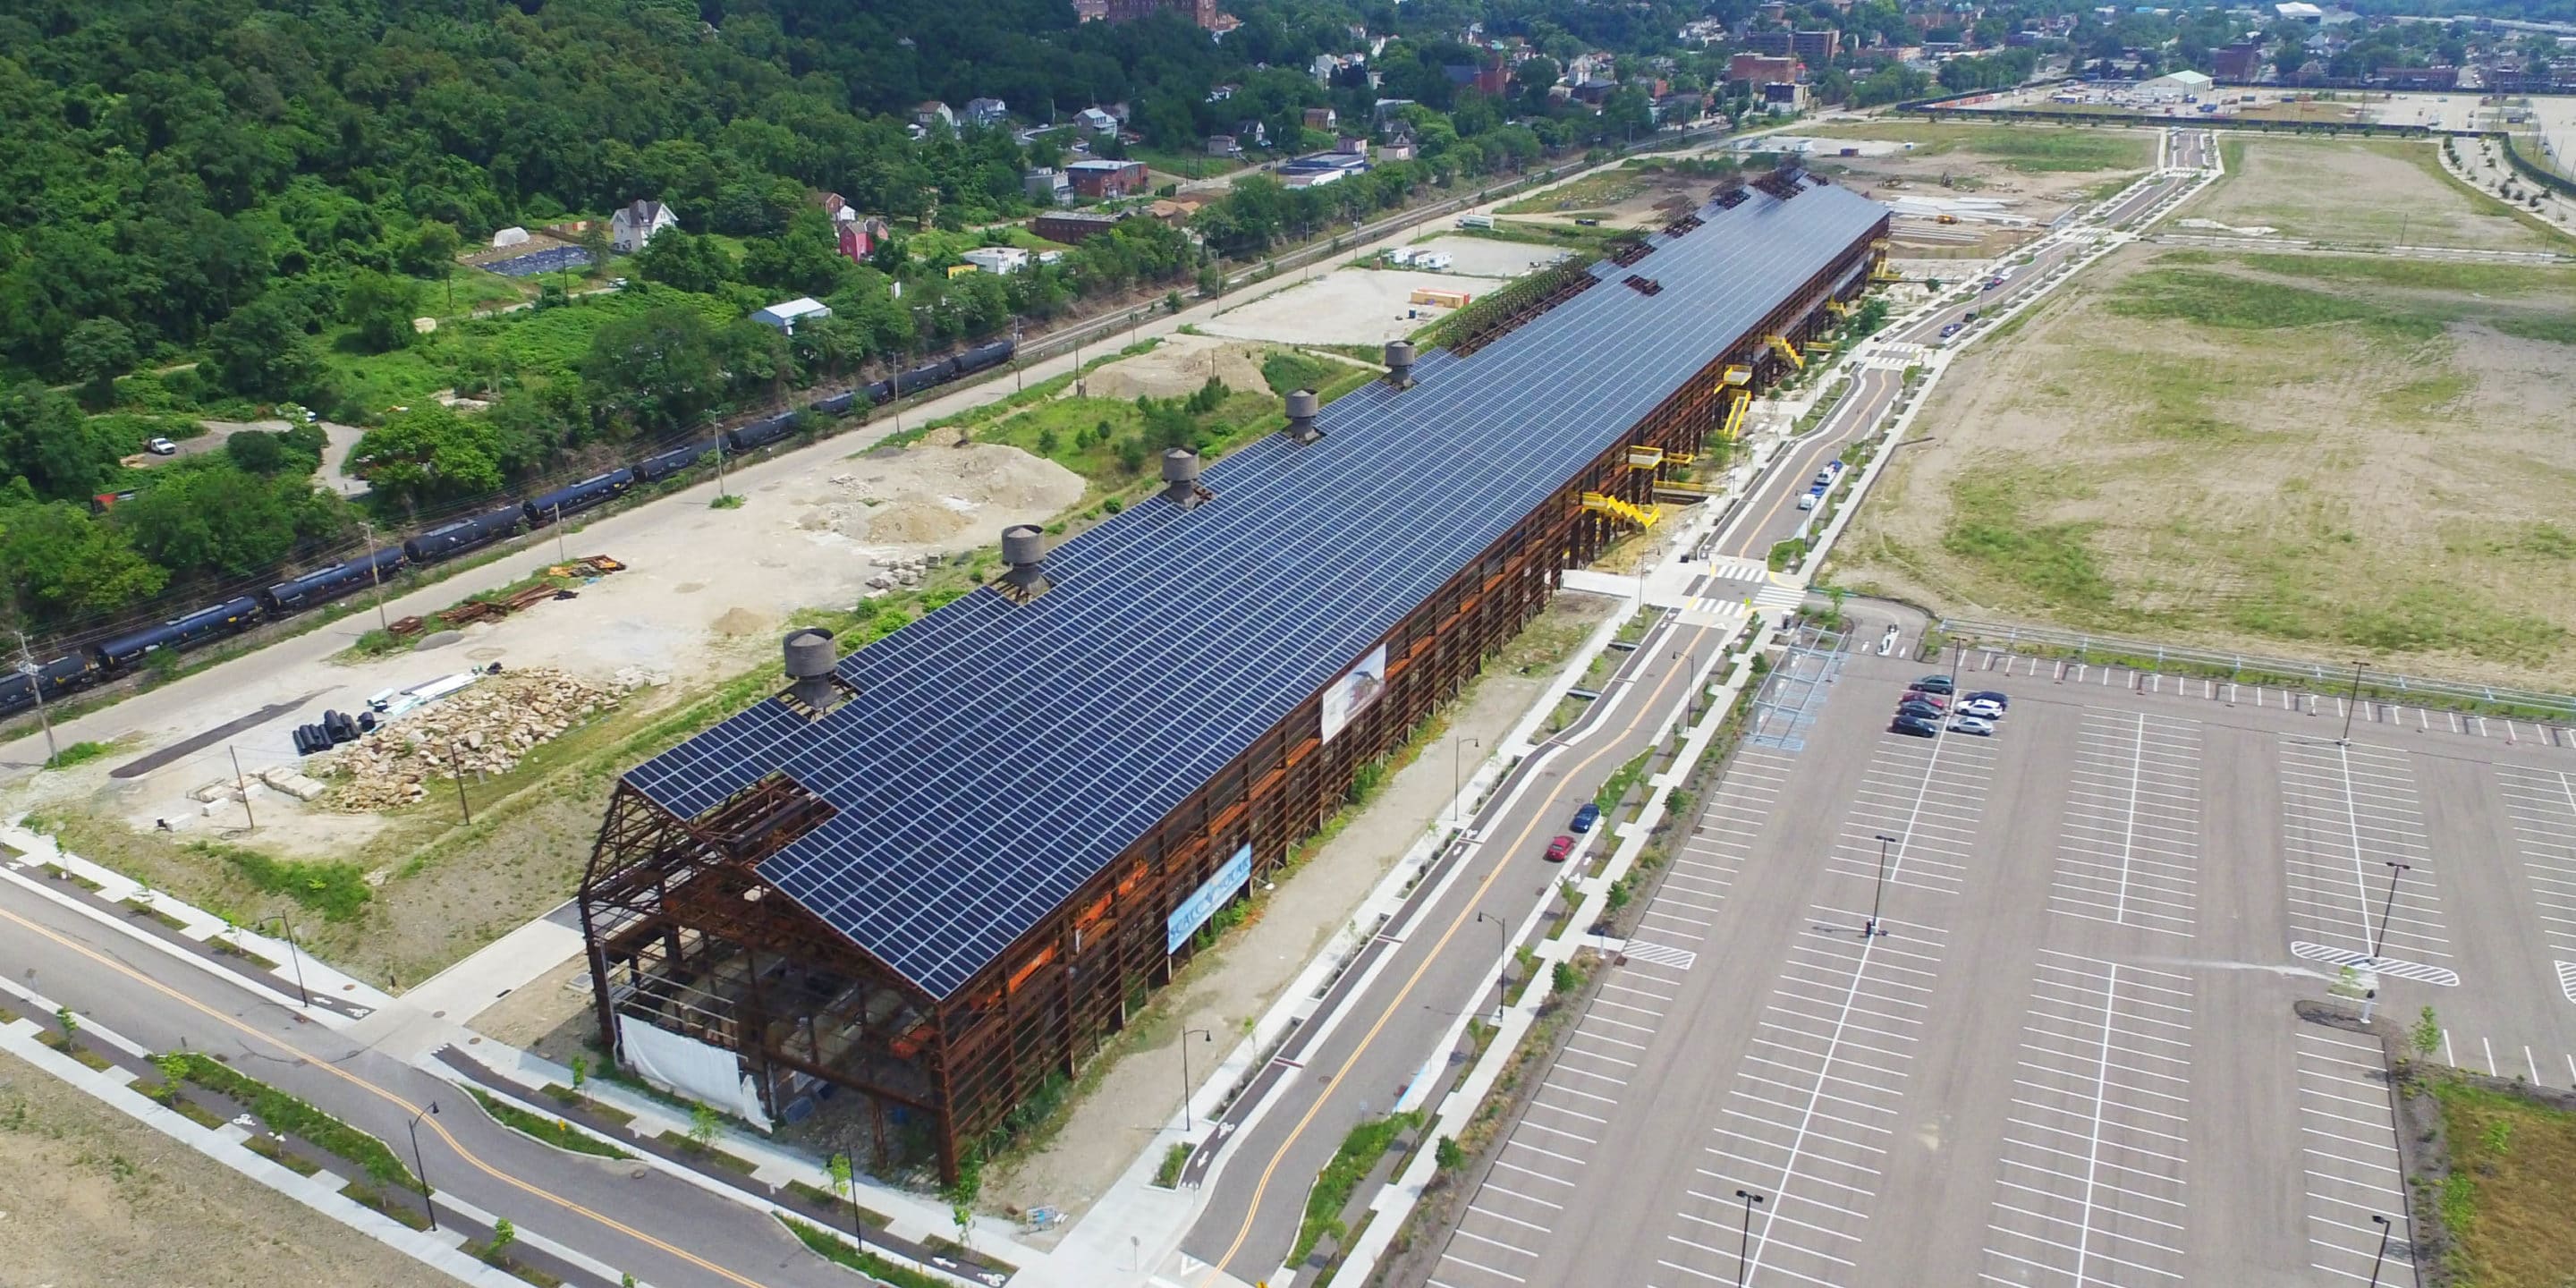 Aerial view of Mill 19 solar project in Pittsburgh, PA